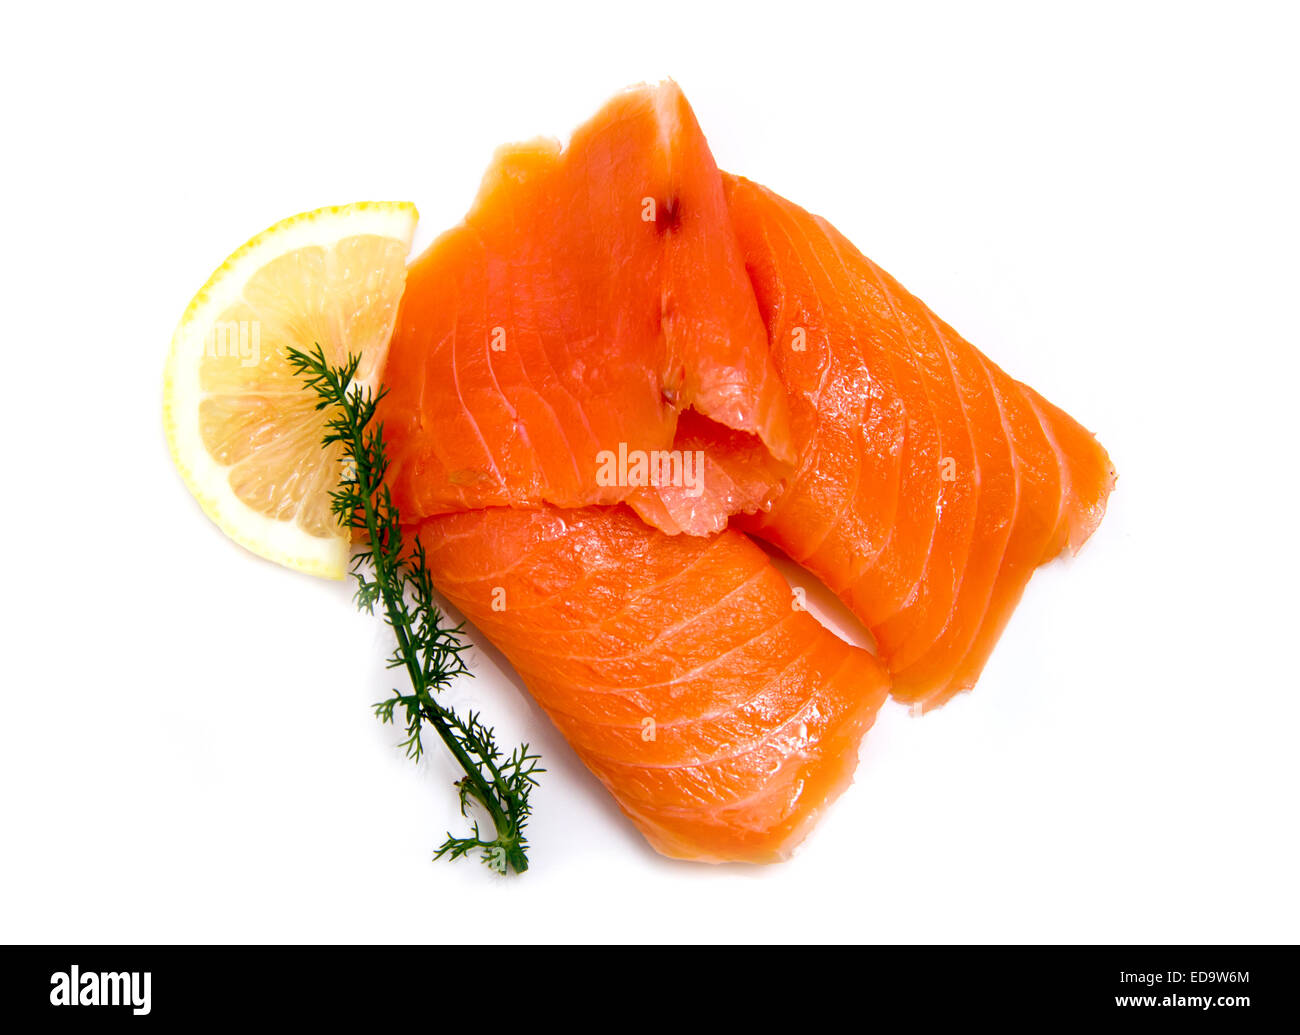 Smoked salmon from above on white background Stock Photo - Alamy